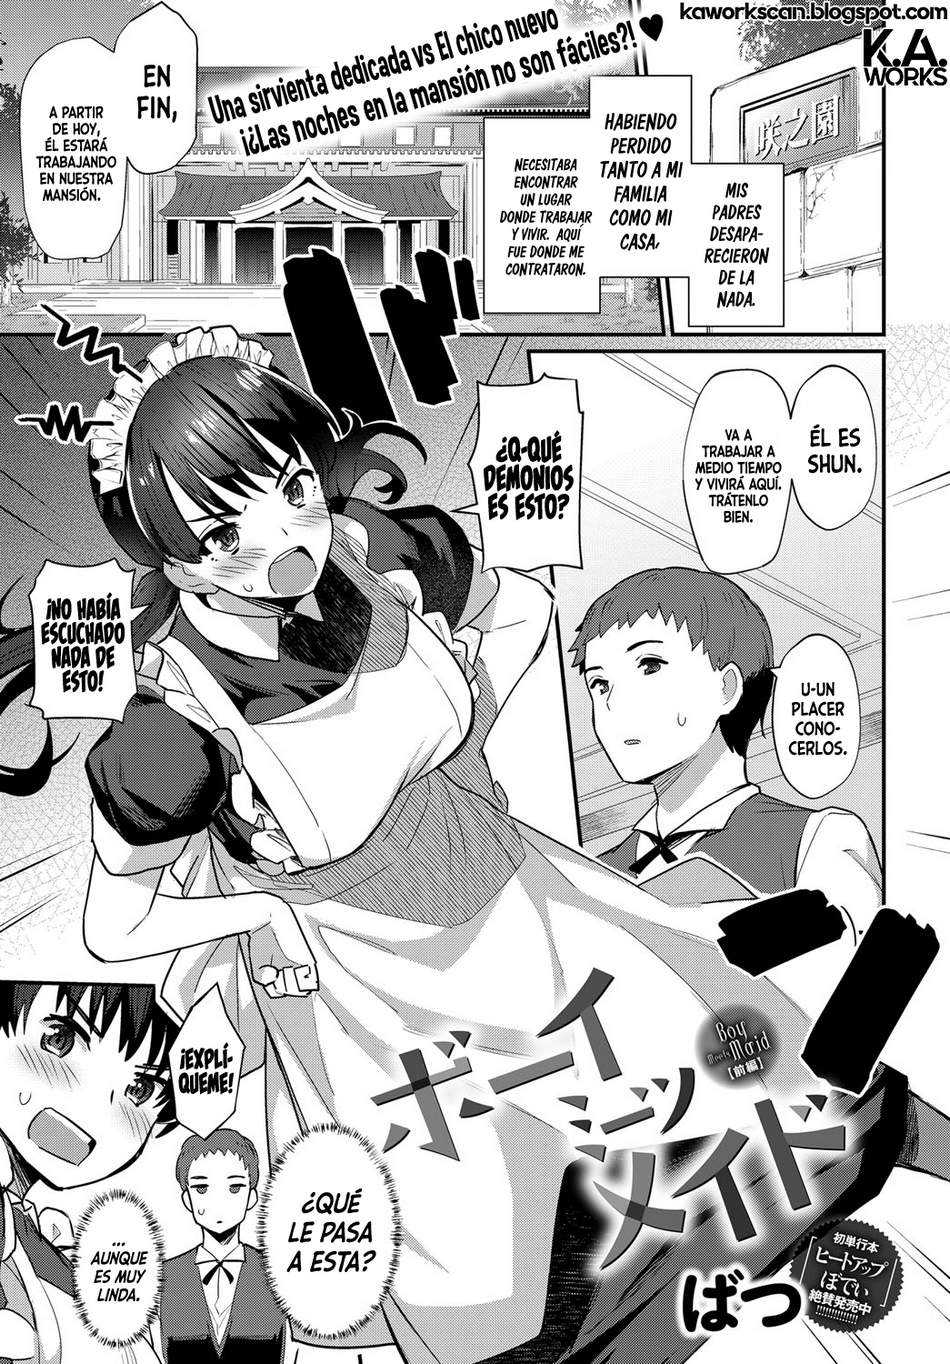 Boy Meets Maid #1 - Page #1